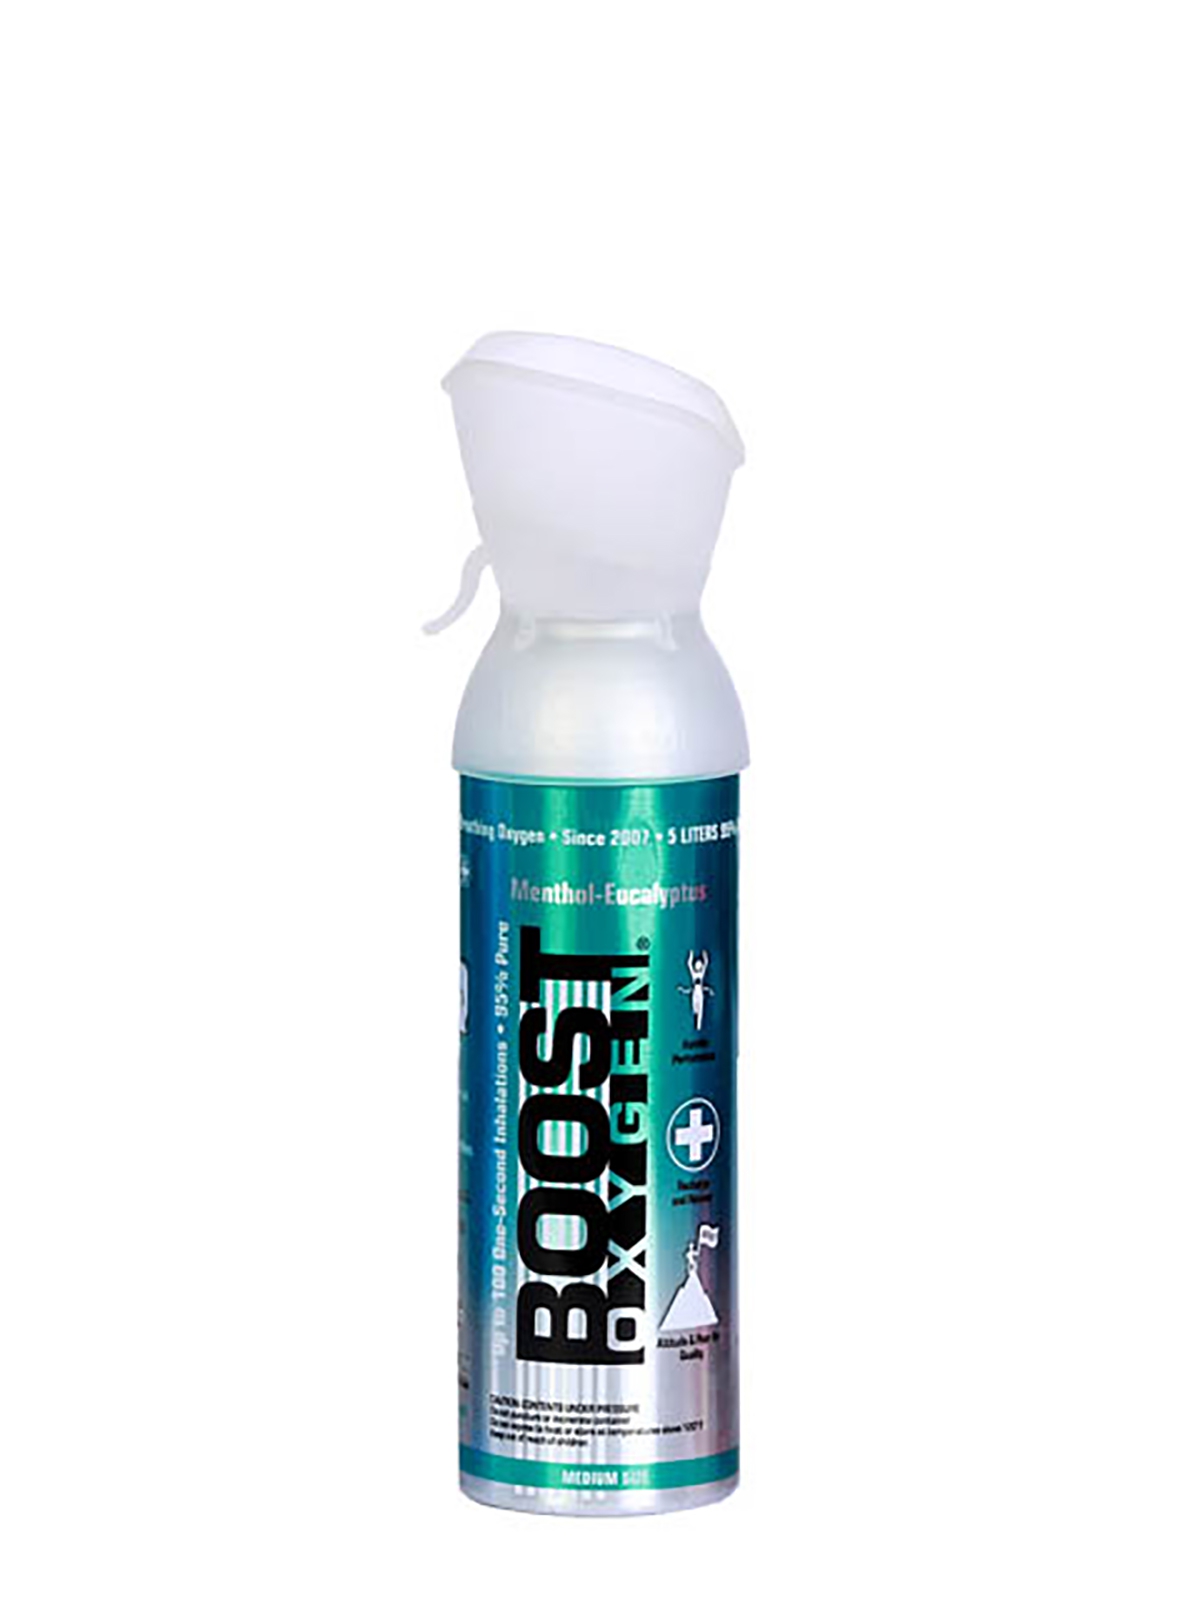 Boost Oxygen Eucalyptus - 95% pure oxygen with taste, 5 liters can